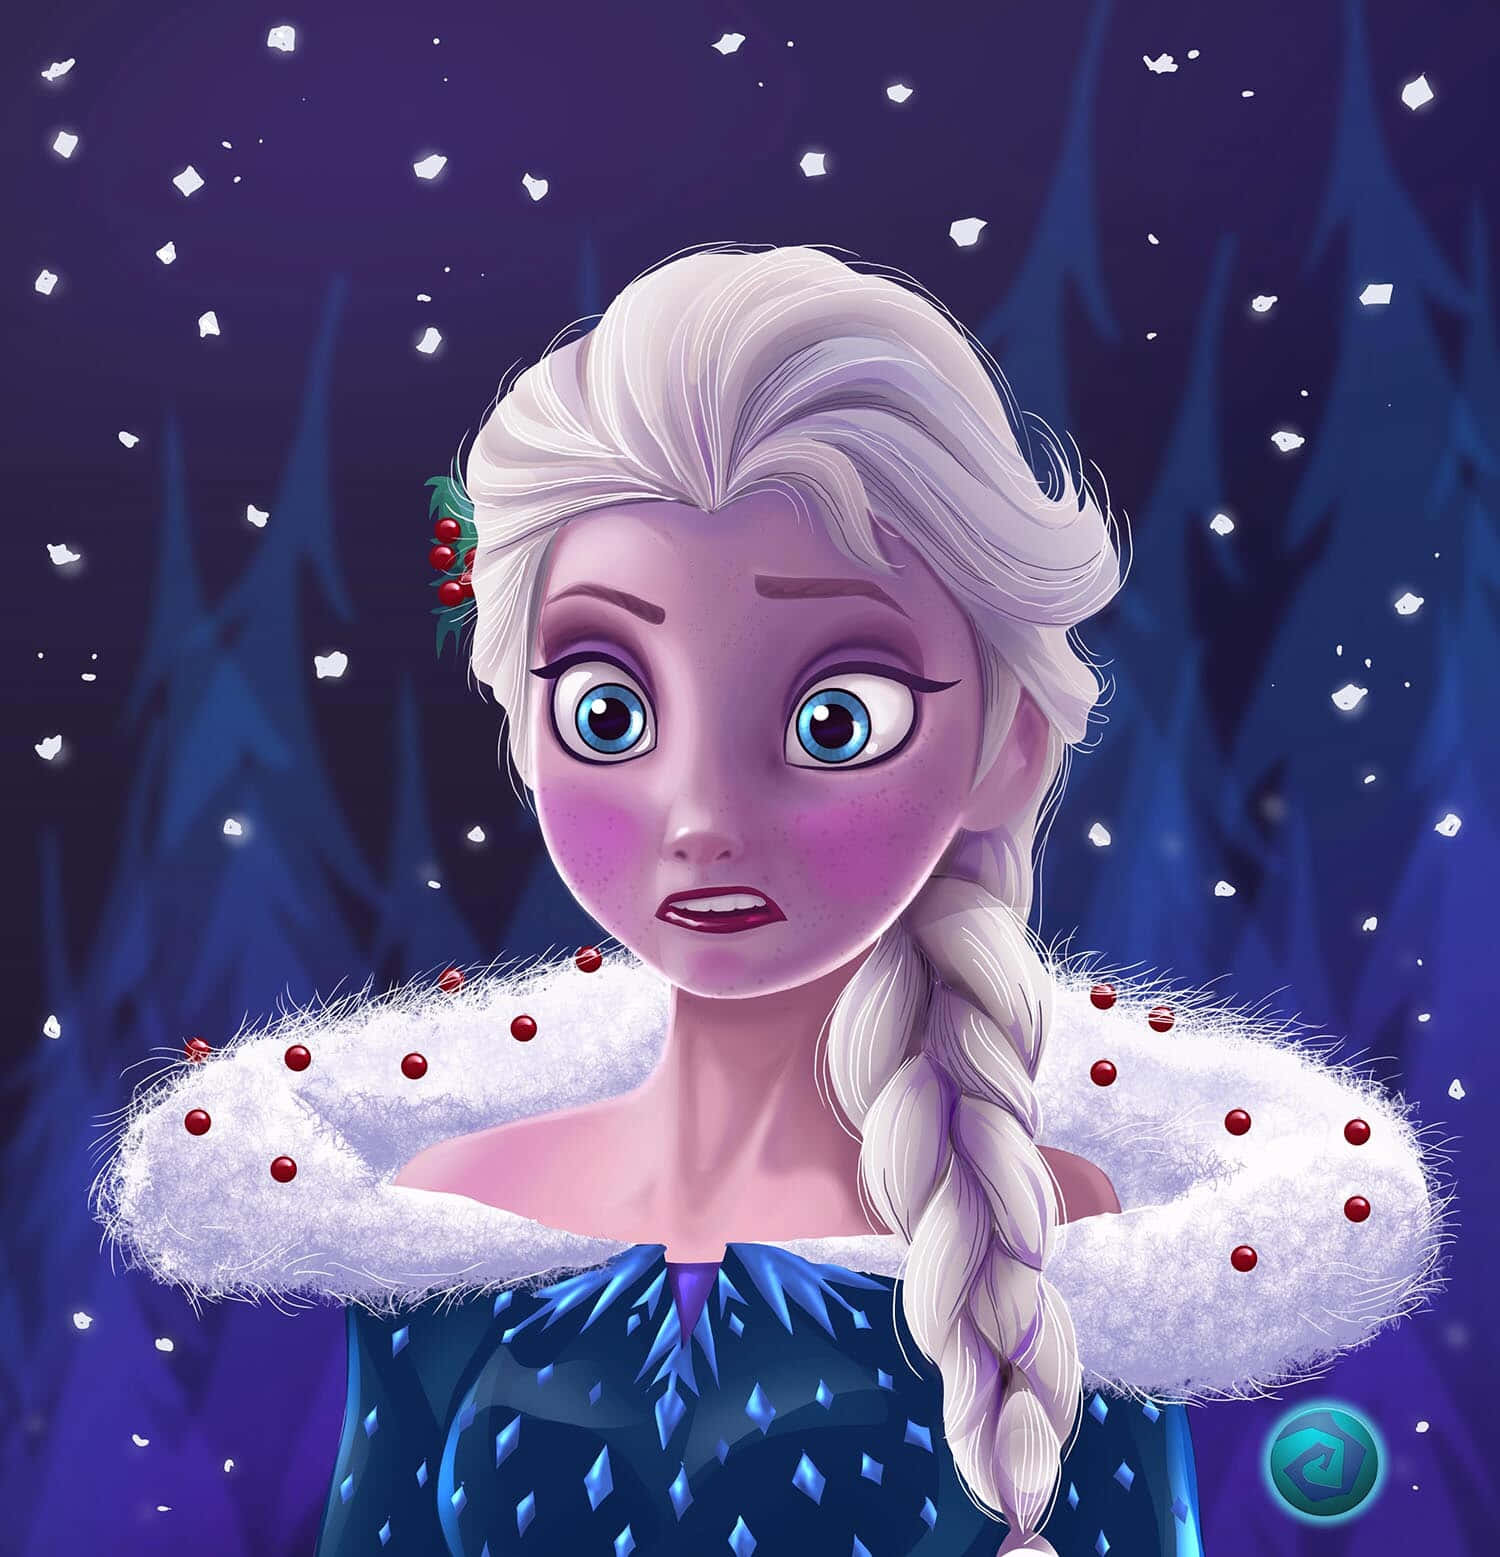 Take control of your own story - Elsa from Frozen